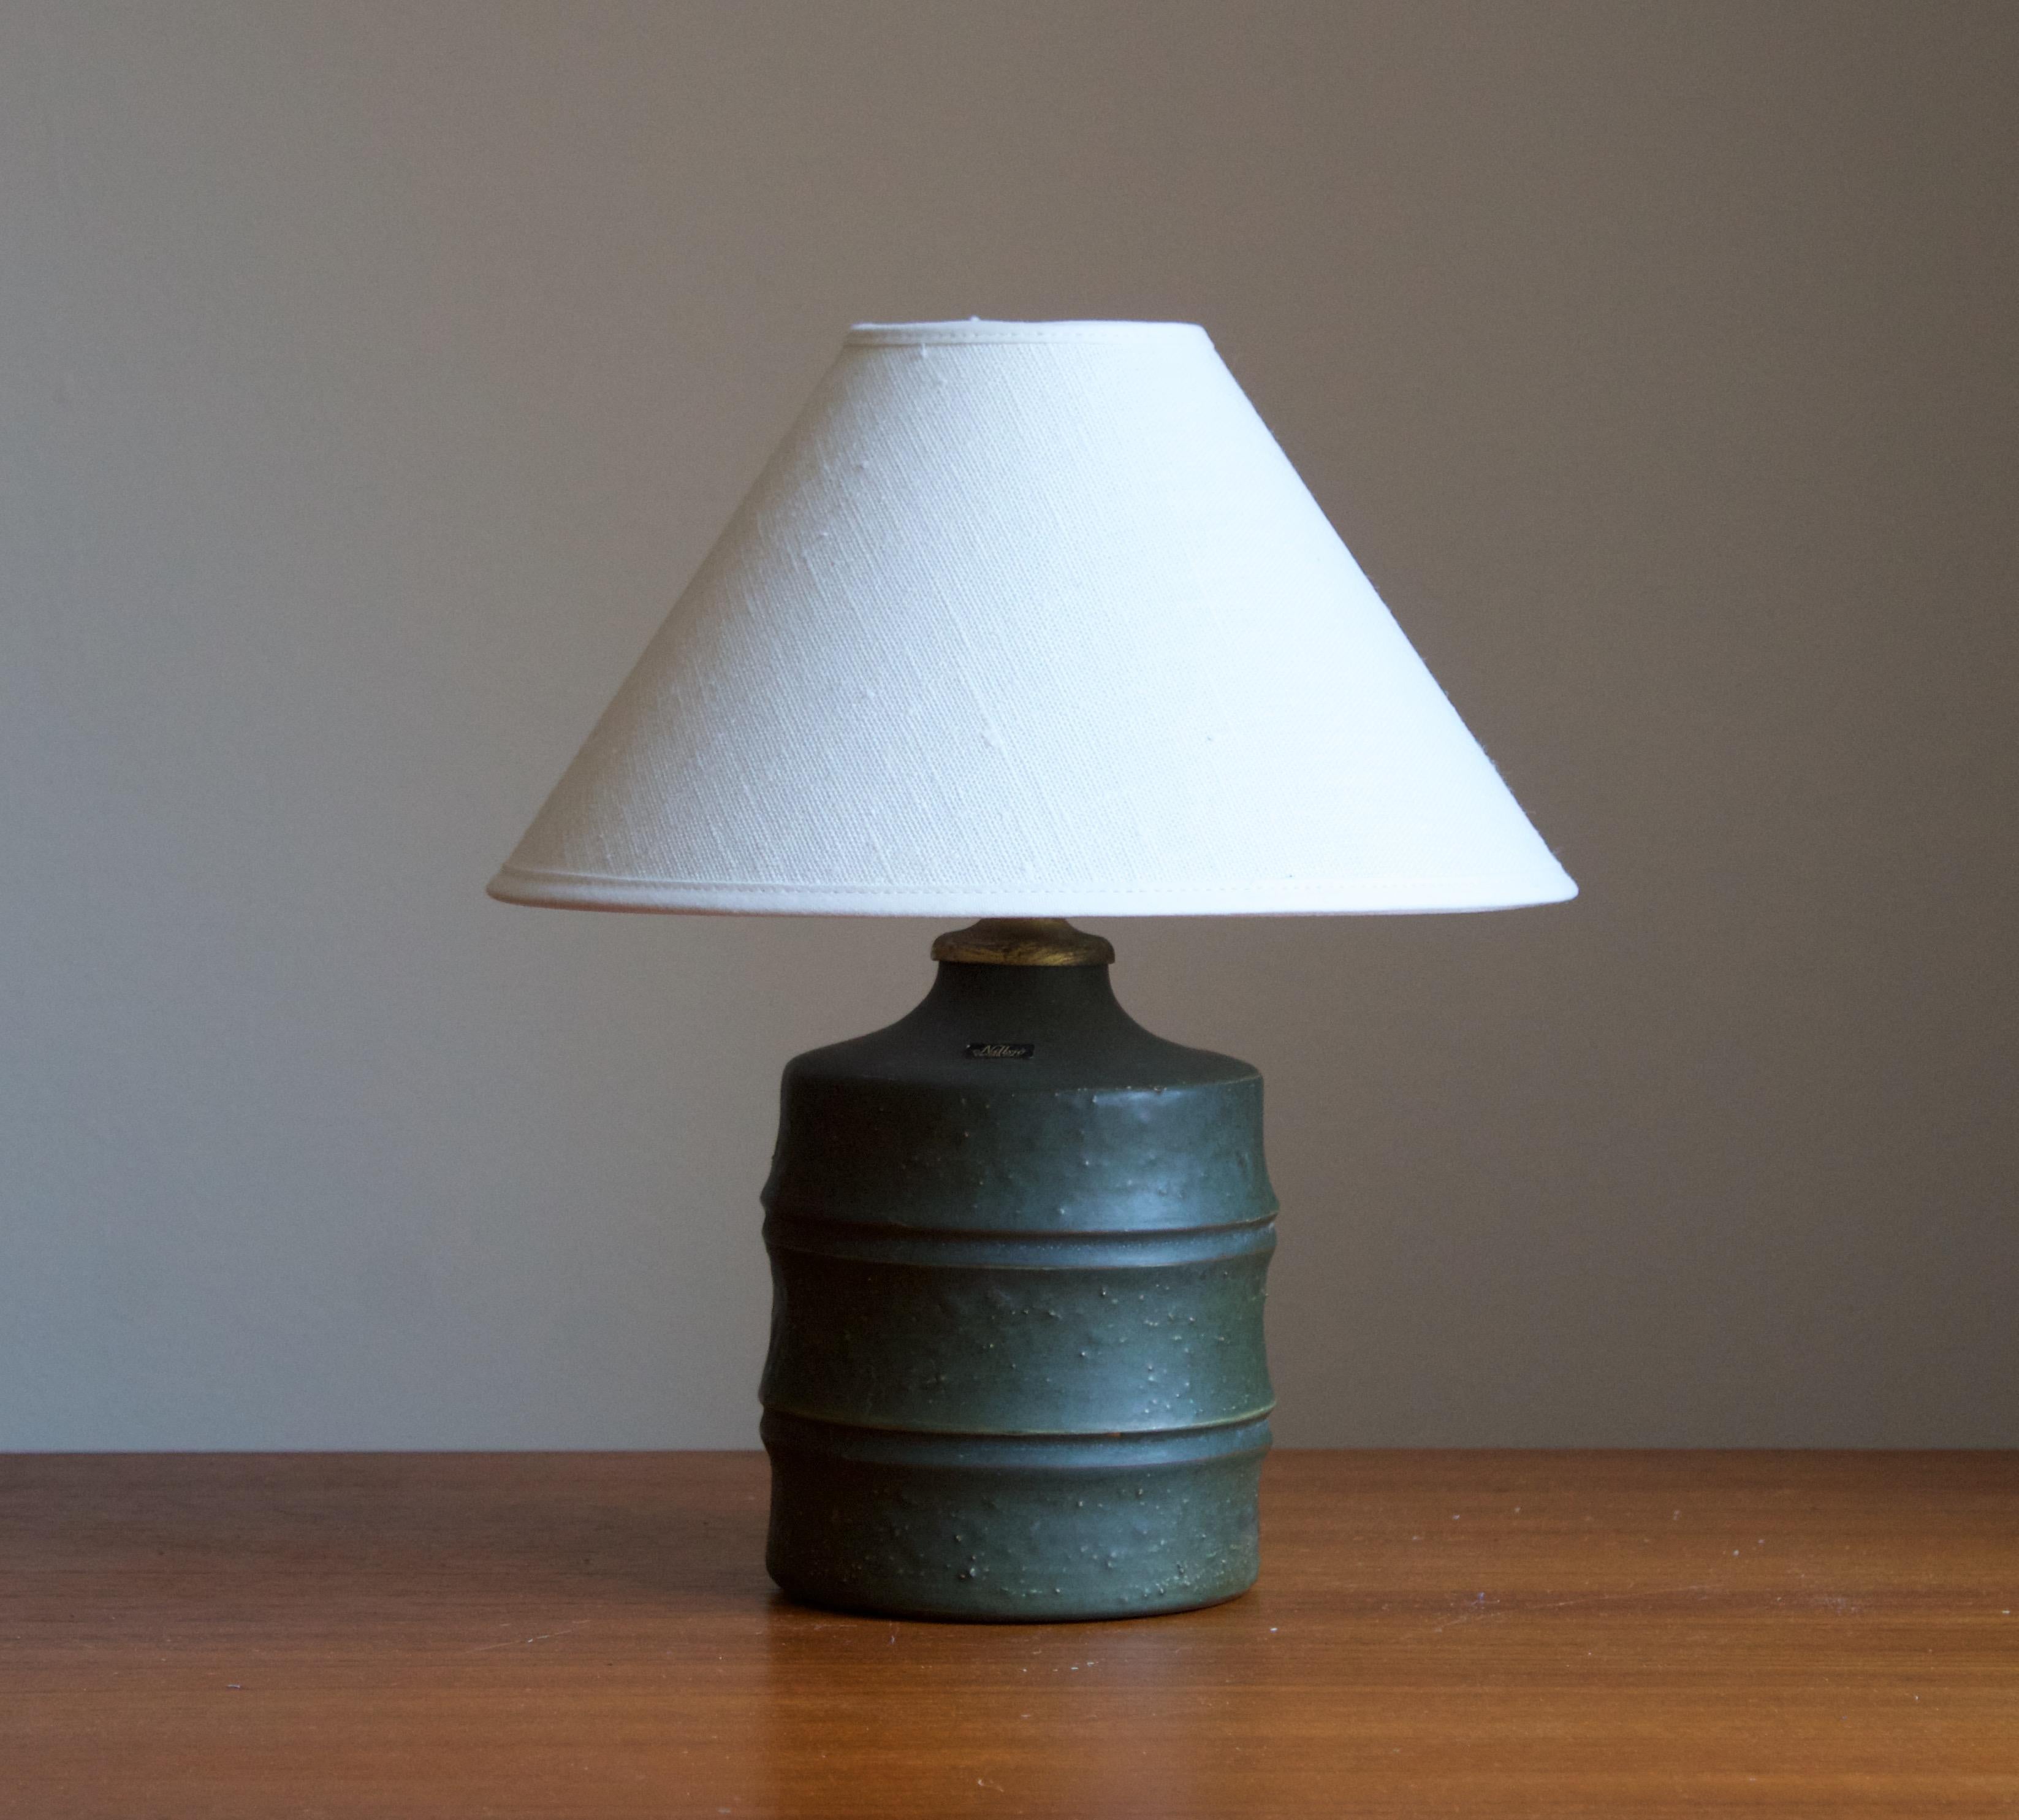 A large modernist table lamp designed by Jerk Werkmäster. Produced by Nittsjö, Sweden, 1930s. Stamped, signed, production labels.

Stated dimensions exclude the lampshade. Sold without lampshade.

Glaze features a green color.

Other designers of